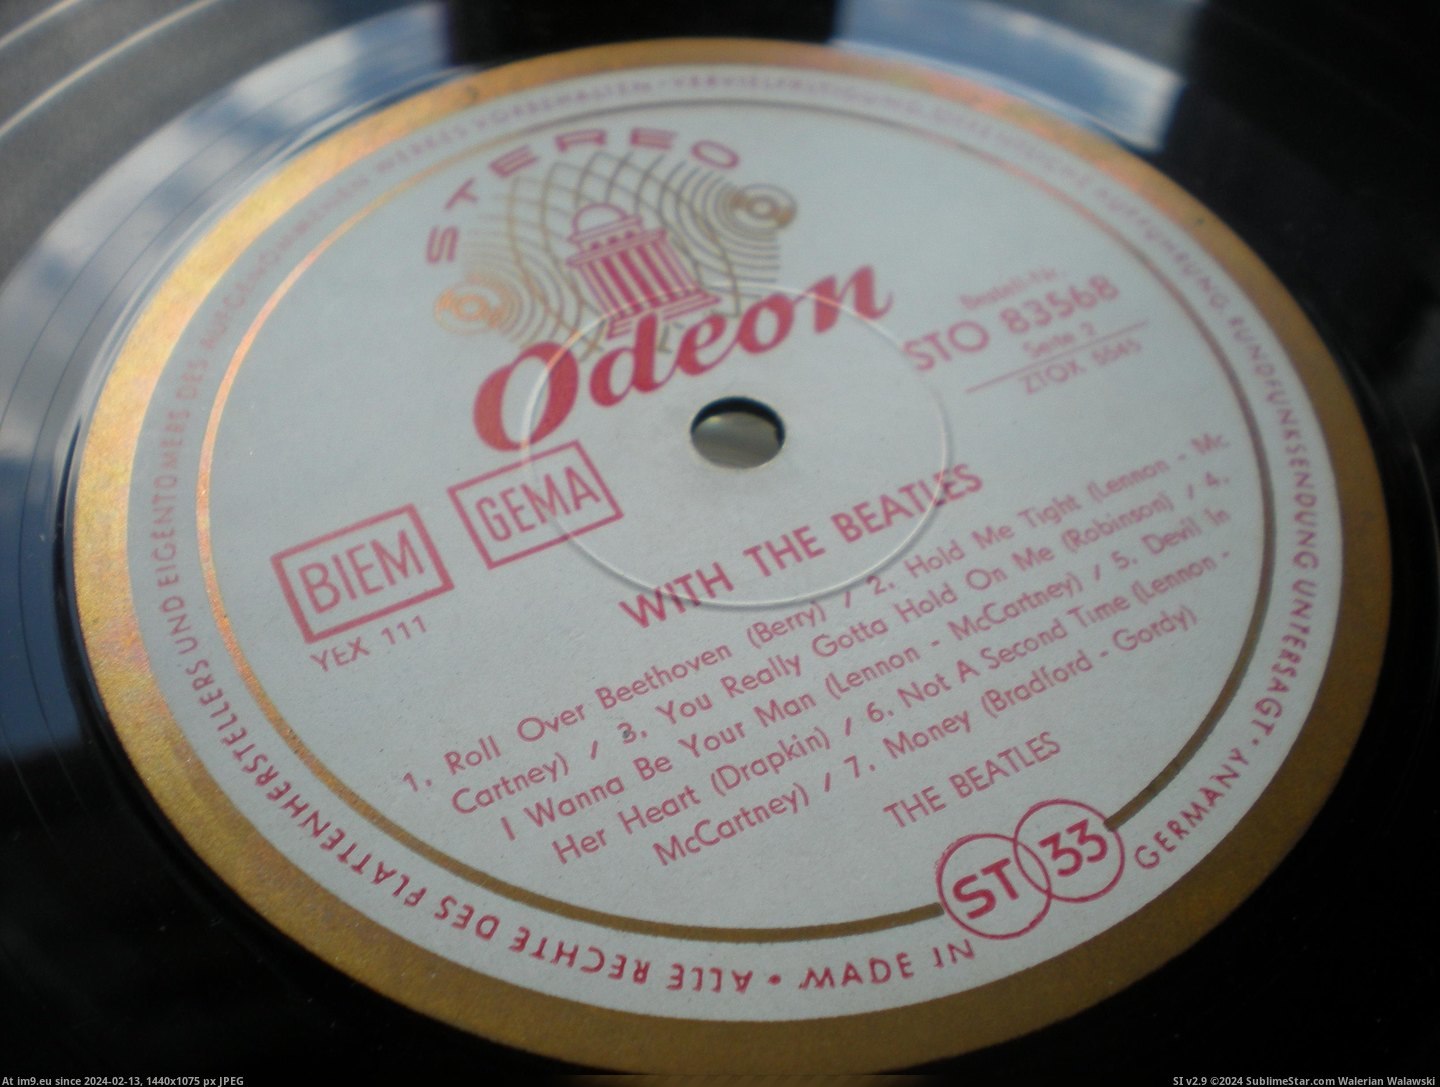 With The Beatles ODEON Export 9 (in New 1)